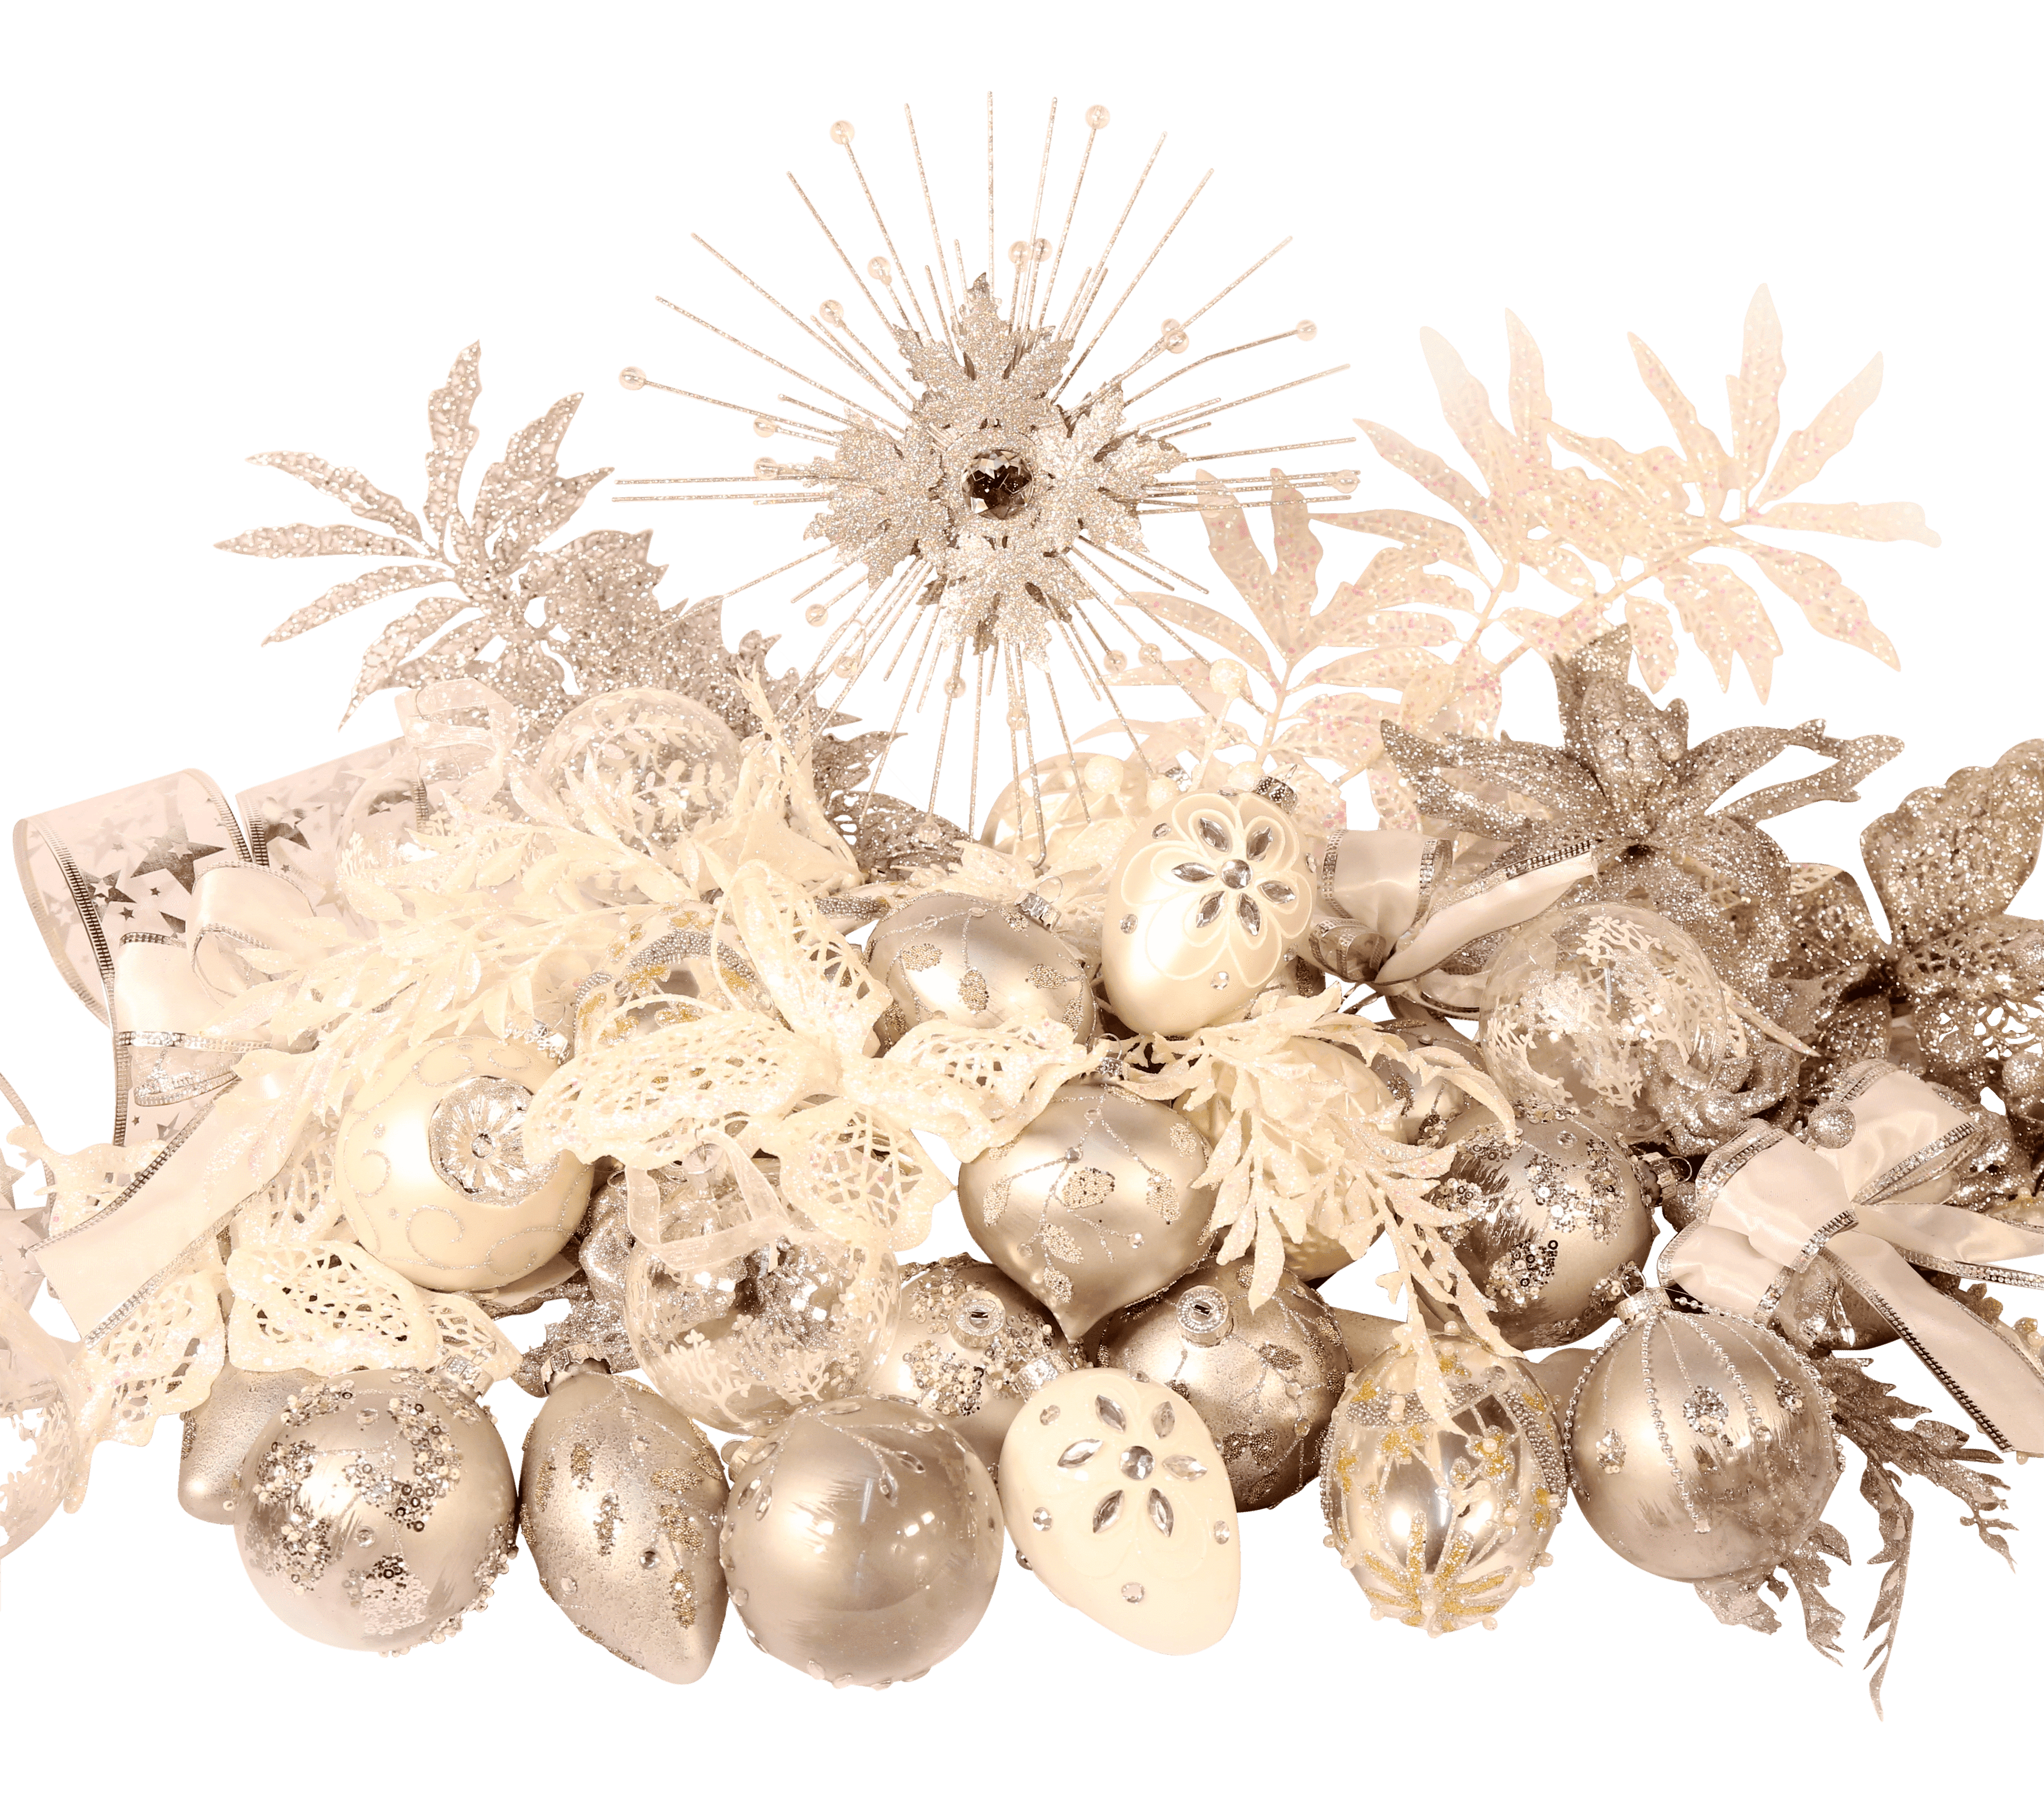 7ft Christmas Tree Deluxe Silver and White Christmas Decoration Set from Pines and Needles